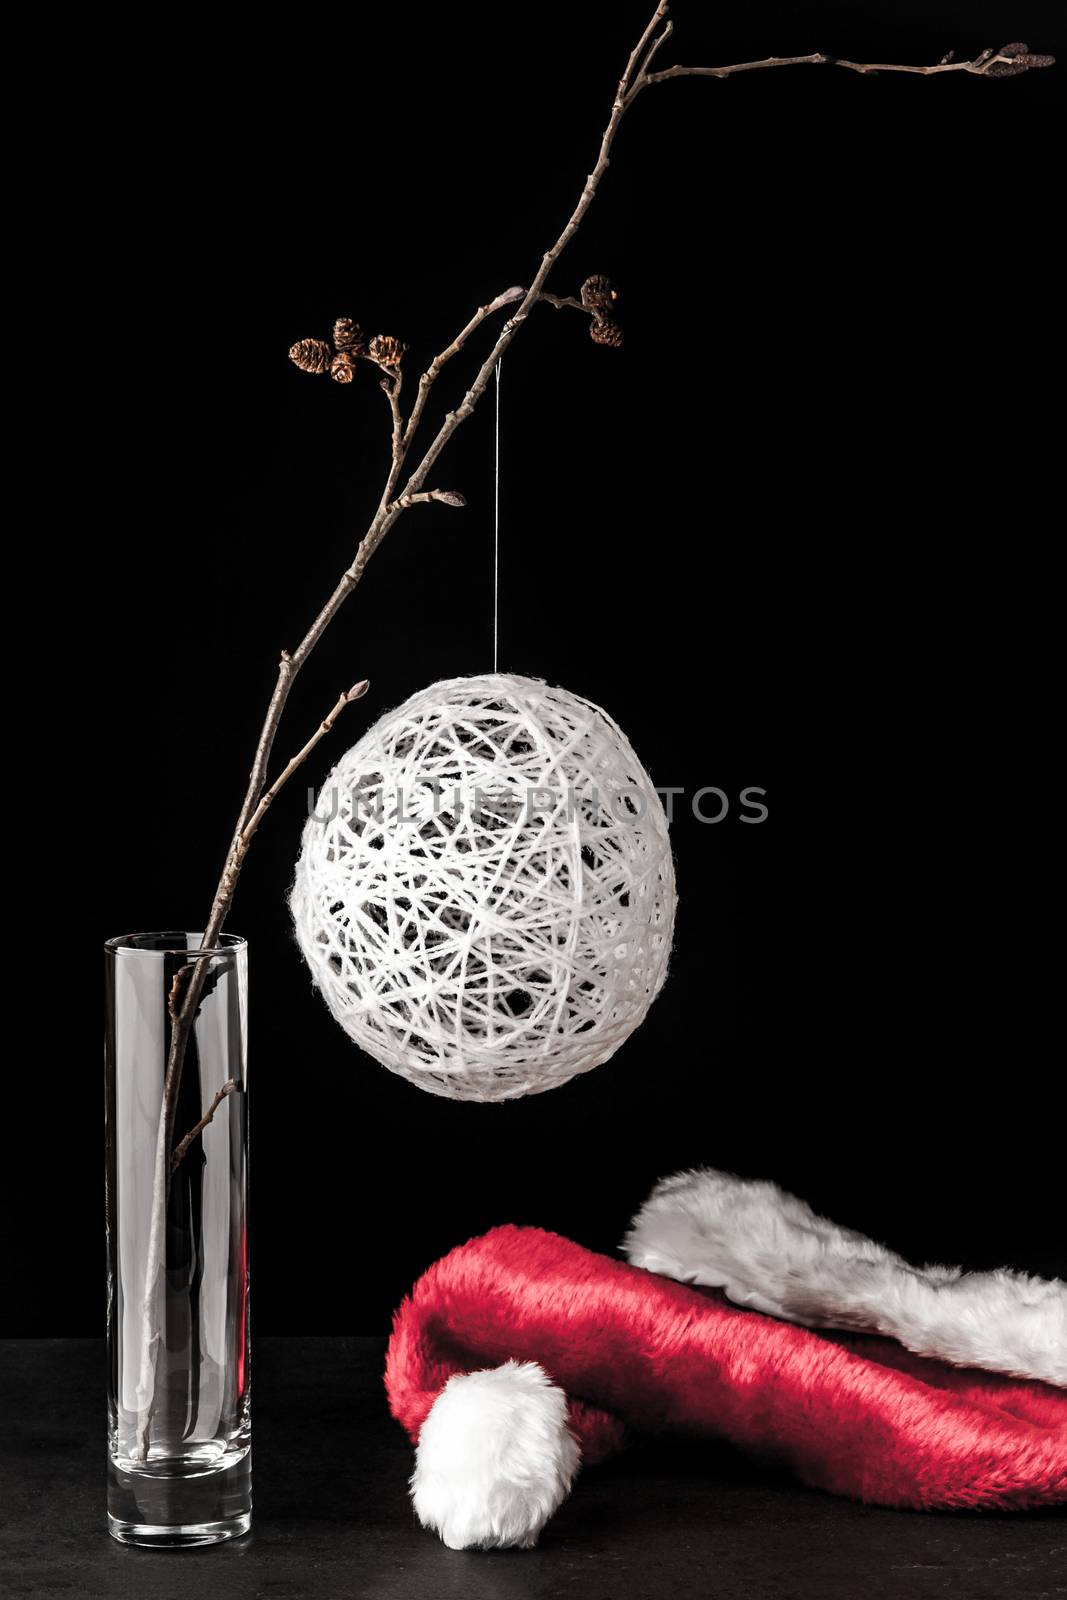 Alder branch in the glass with a white christmas ball and santa claus hat on the black stone table vertical